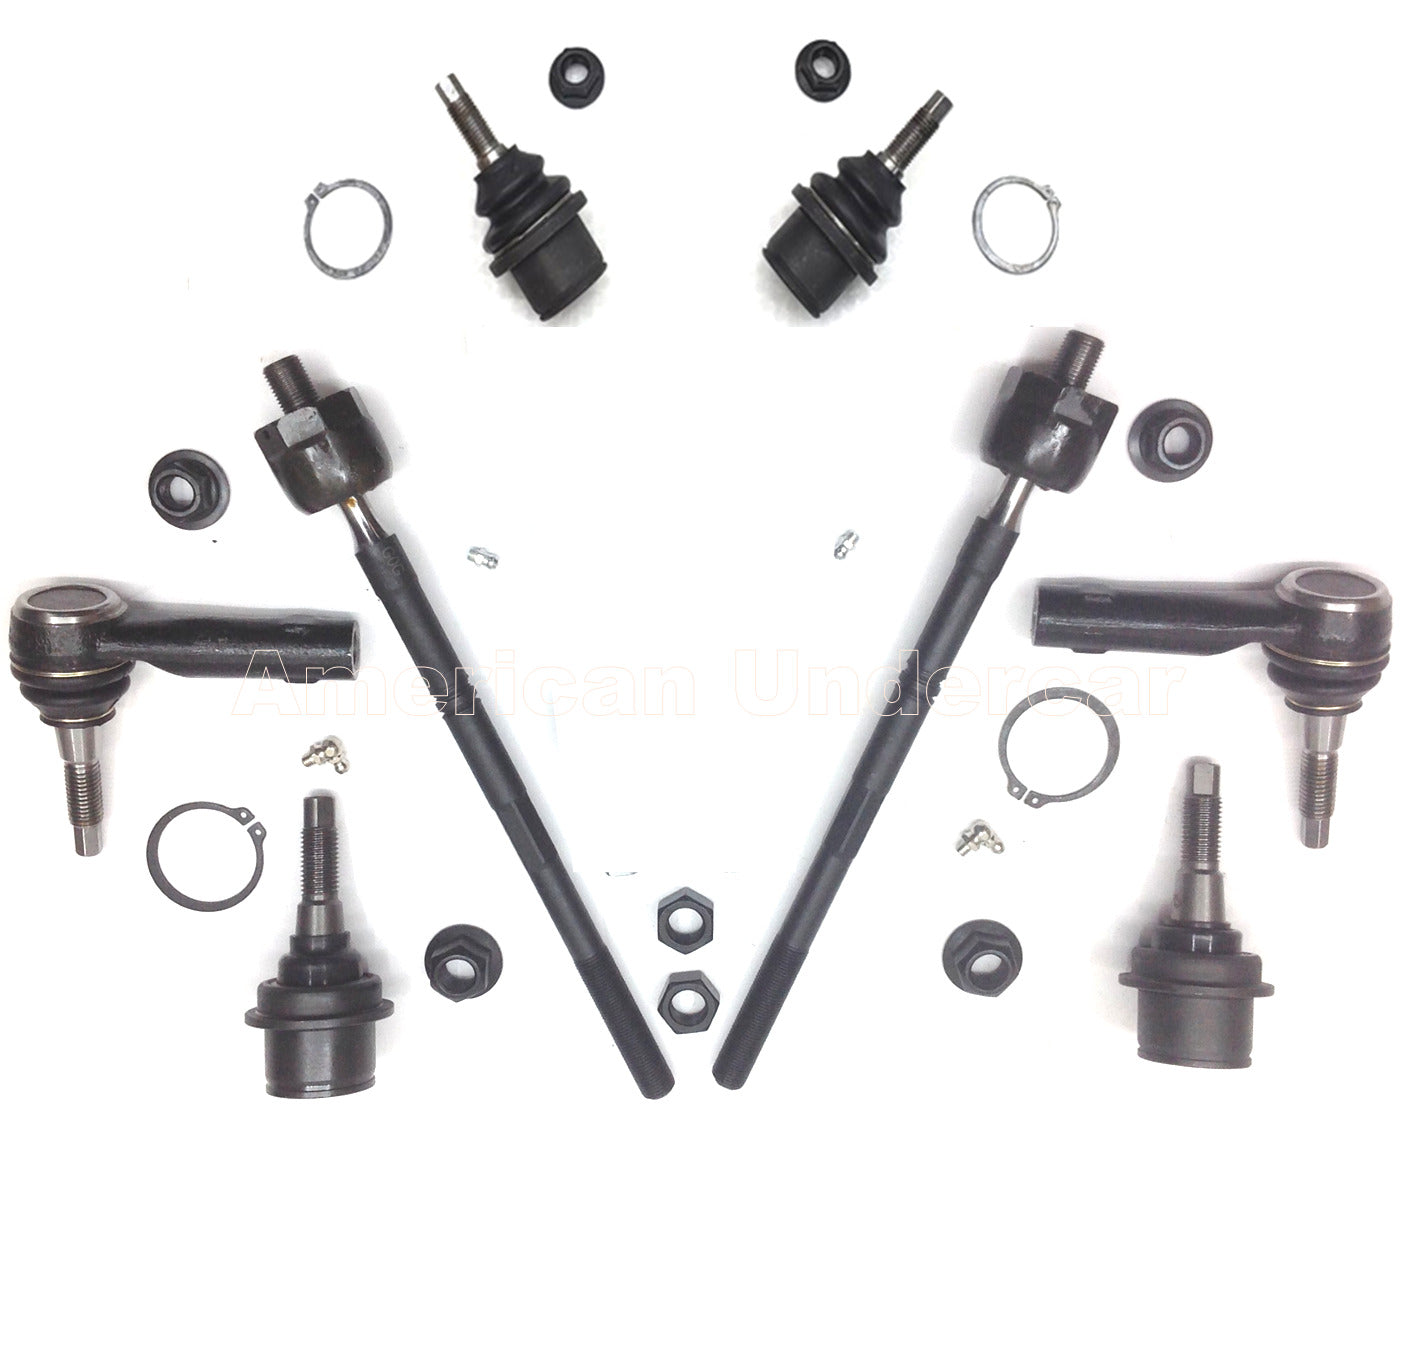 HD Ball Joints Tie Rod Steering and Suspension Kit for 2015-2020 Ford F150 4x4